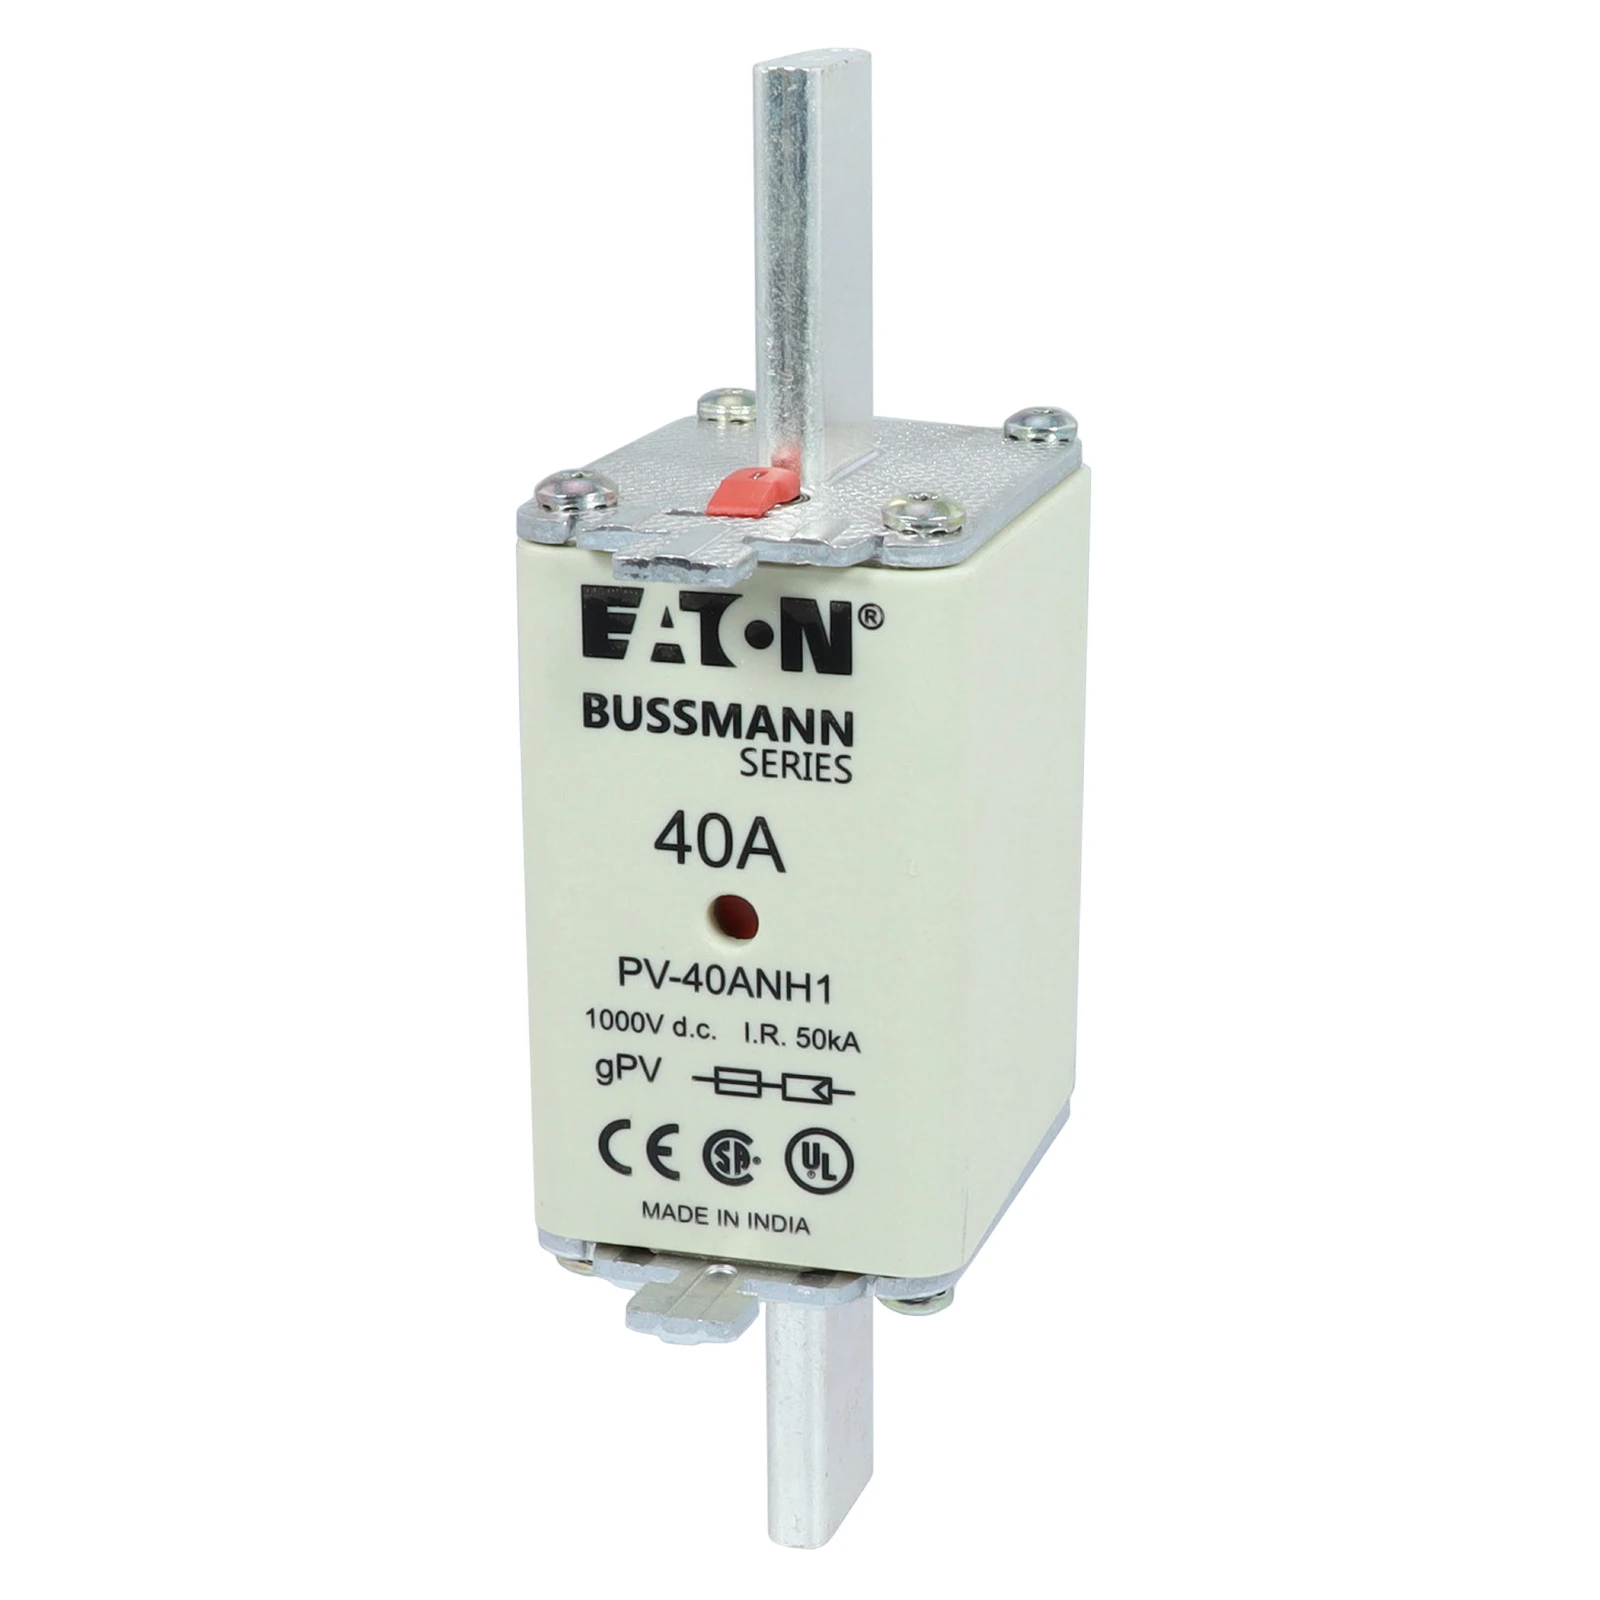 3038097 - Eaton FUSE 40A 1000V DC PV SIZE 1 DUAL IN